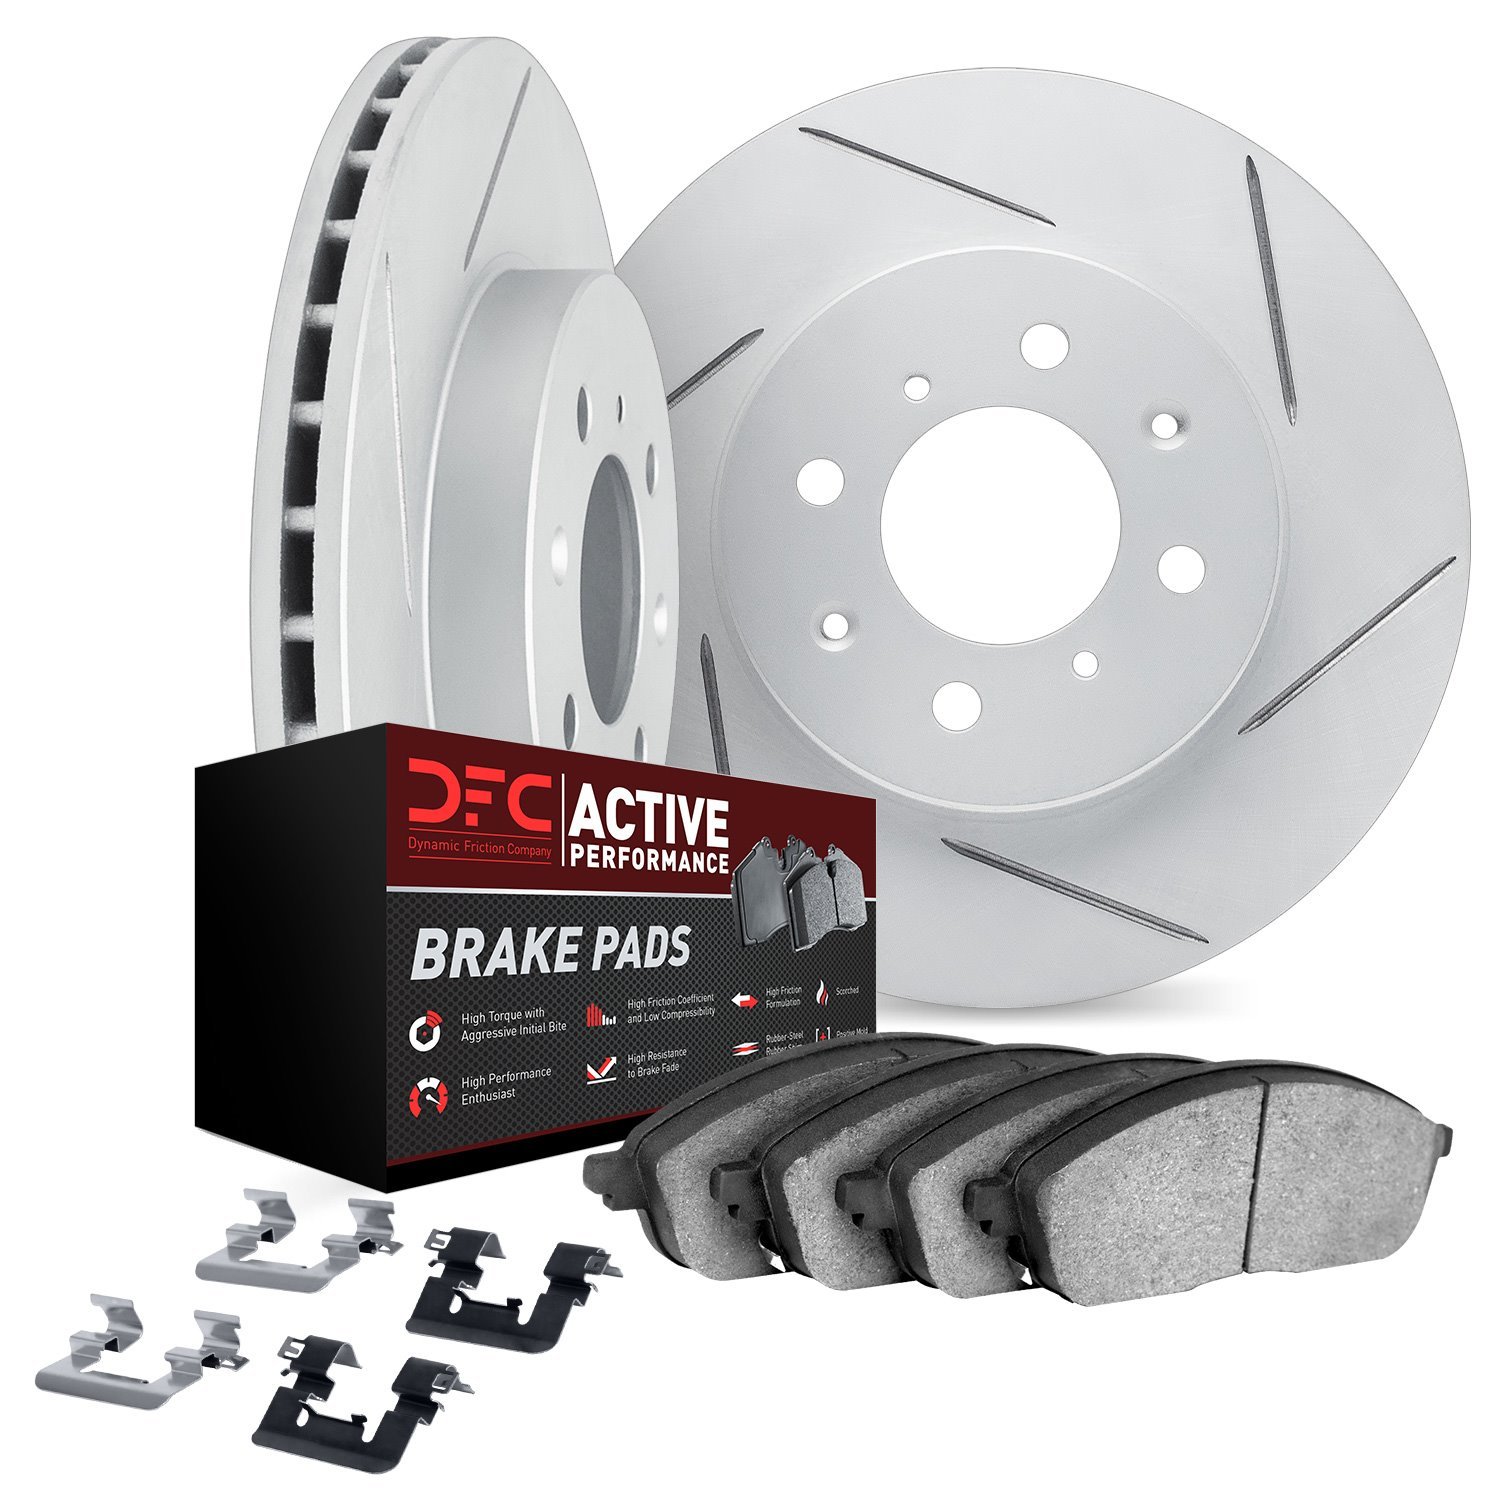 2712-59036 Geoperformance Slotted Brake Rotors with Active Performance Pads Kits & Hardware, 1998-2002 Acura/Honda, Position: Fr